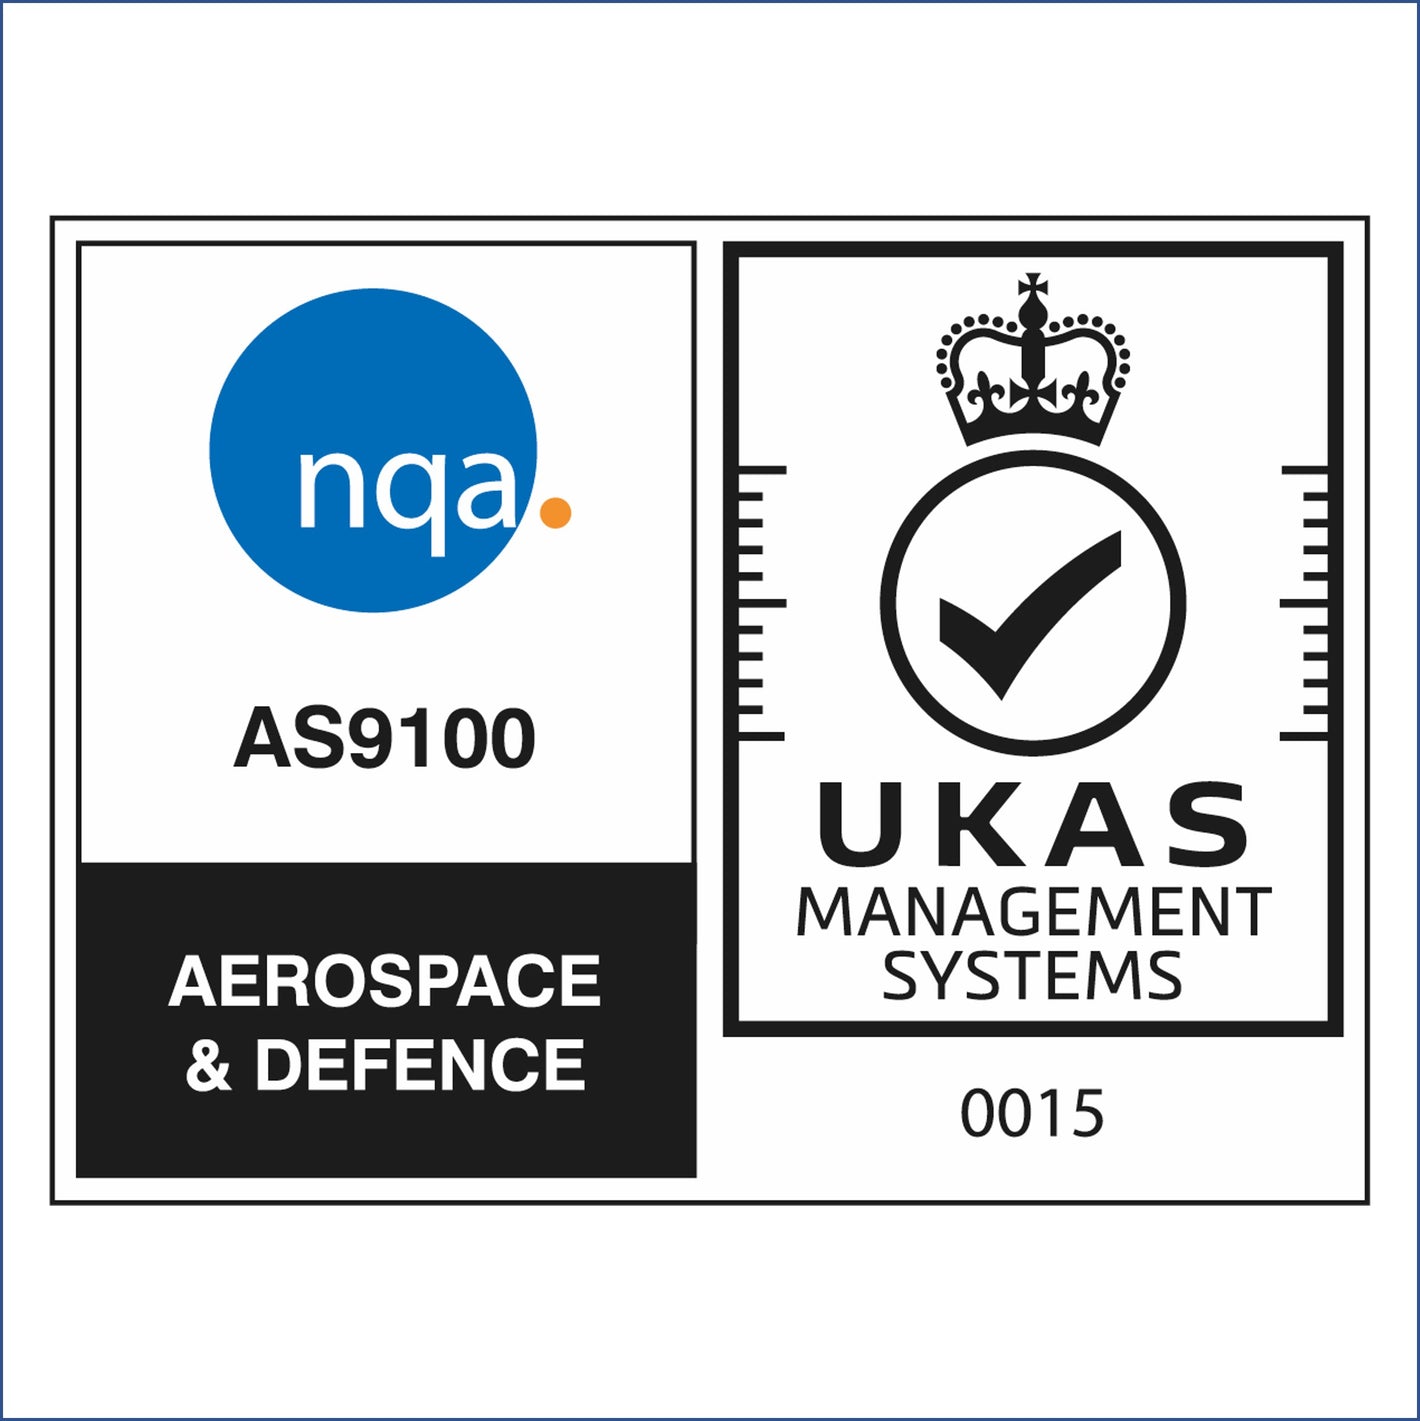 CCP Gransden have attained the AS9100 AEROSPACE & DEFENCE Management Certification Stamp